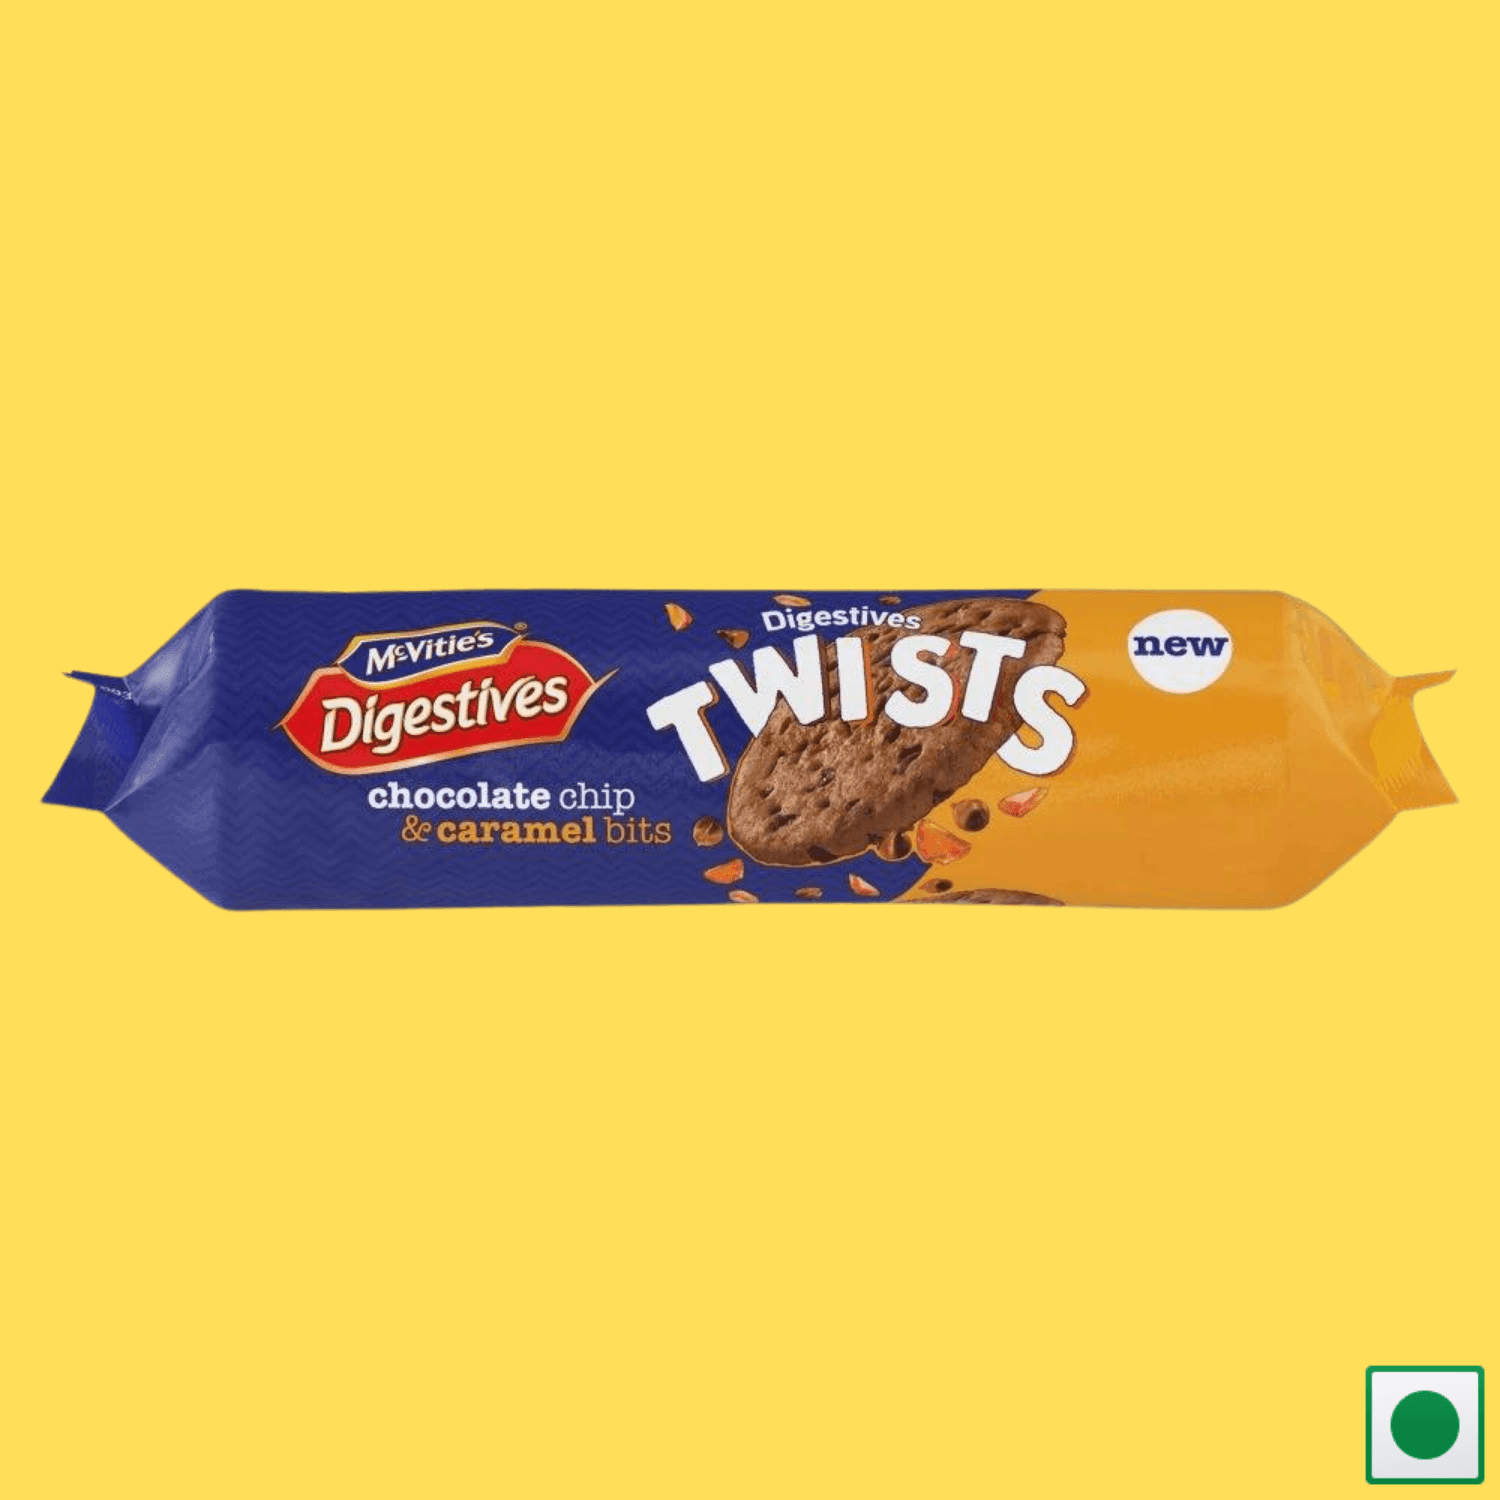 McVitie's Digestives Twists Chocolate Chip & Caramel Biscuits, 276g (Imported) - Super 7 Mart